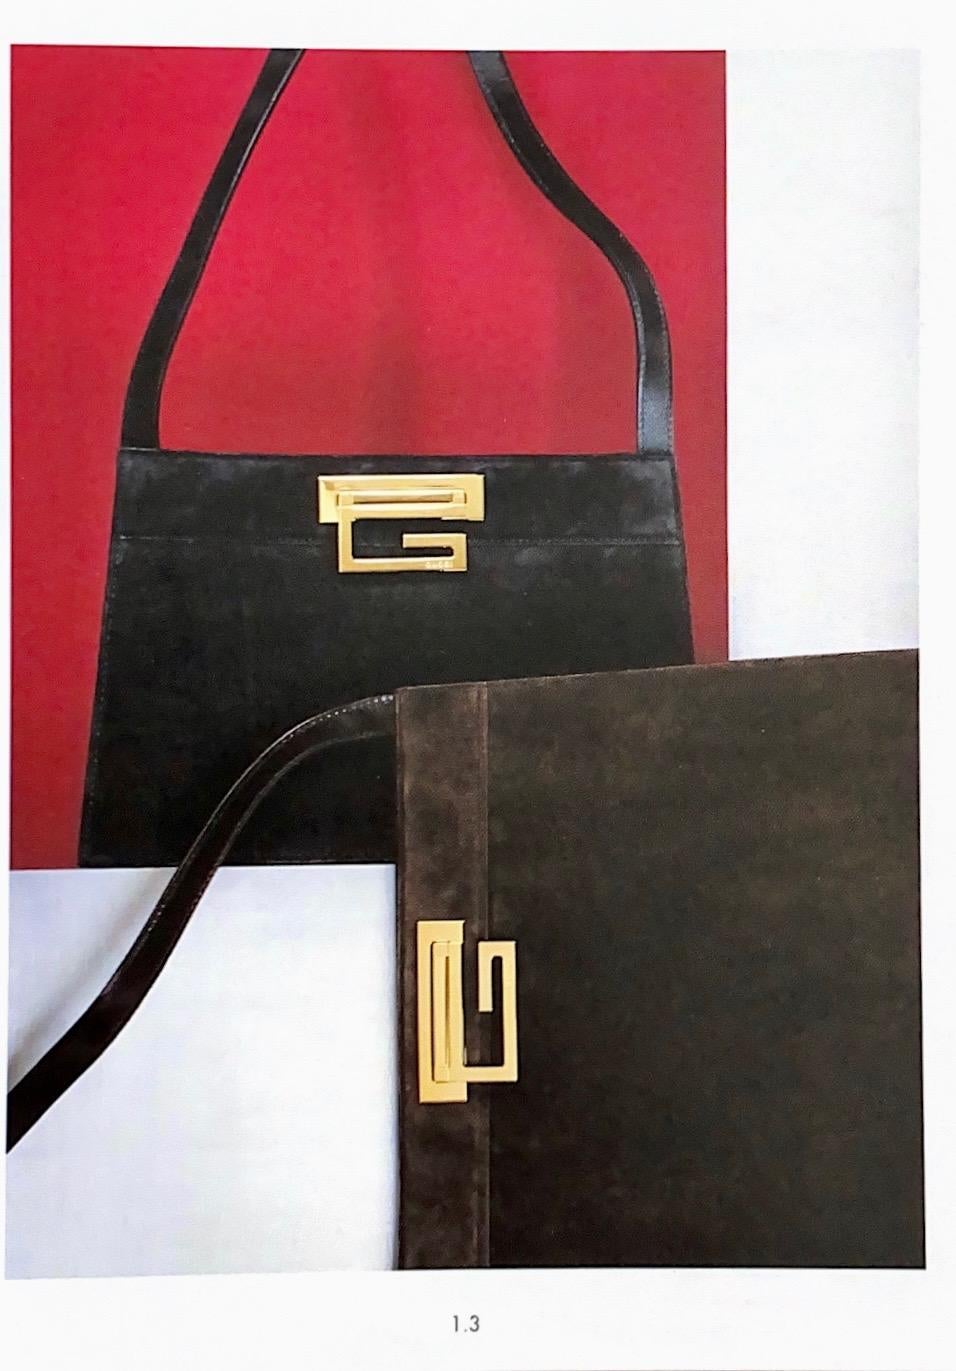 Presenting a rare silk-satin asymmetric mini bag designed by Tom Ford for the Fall/Winter 1997 Gucci collection. The gold-toned G-lock hardware is featured in the F/W 1997 catalog on multiple bags and adds a sleek brand signature to the front of the